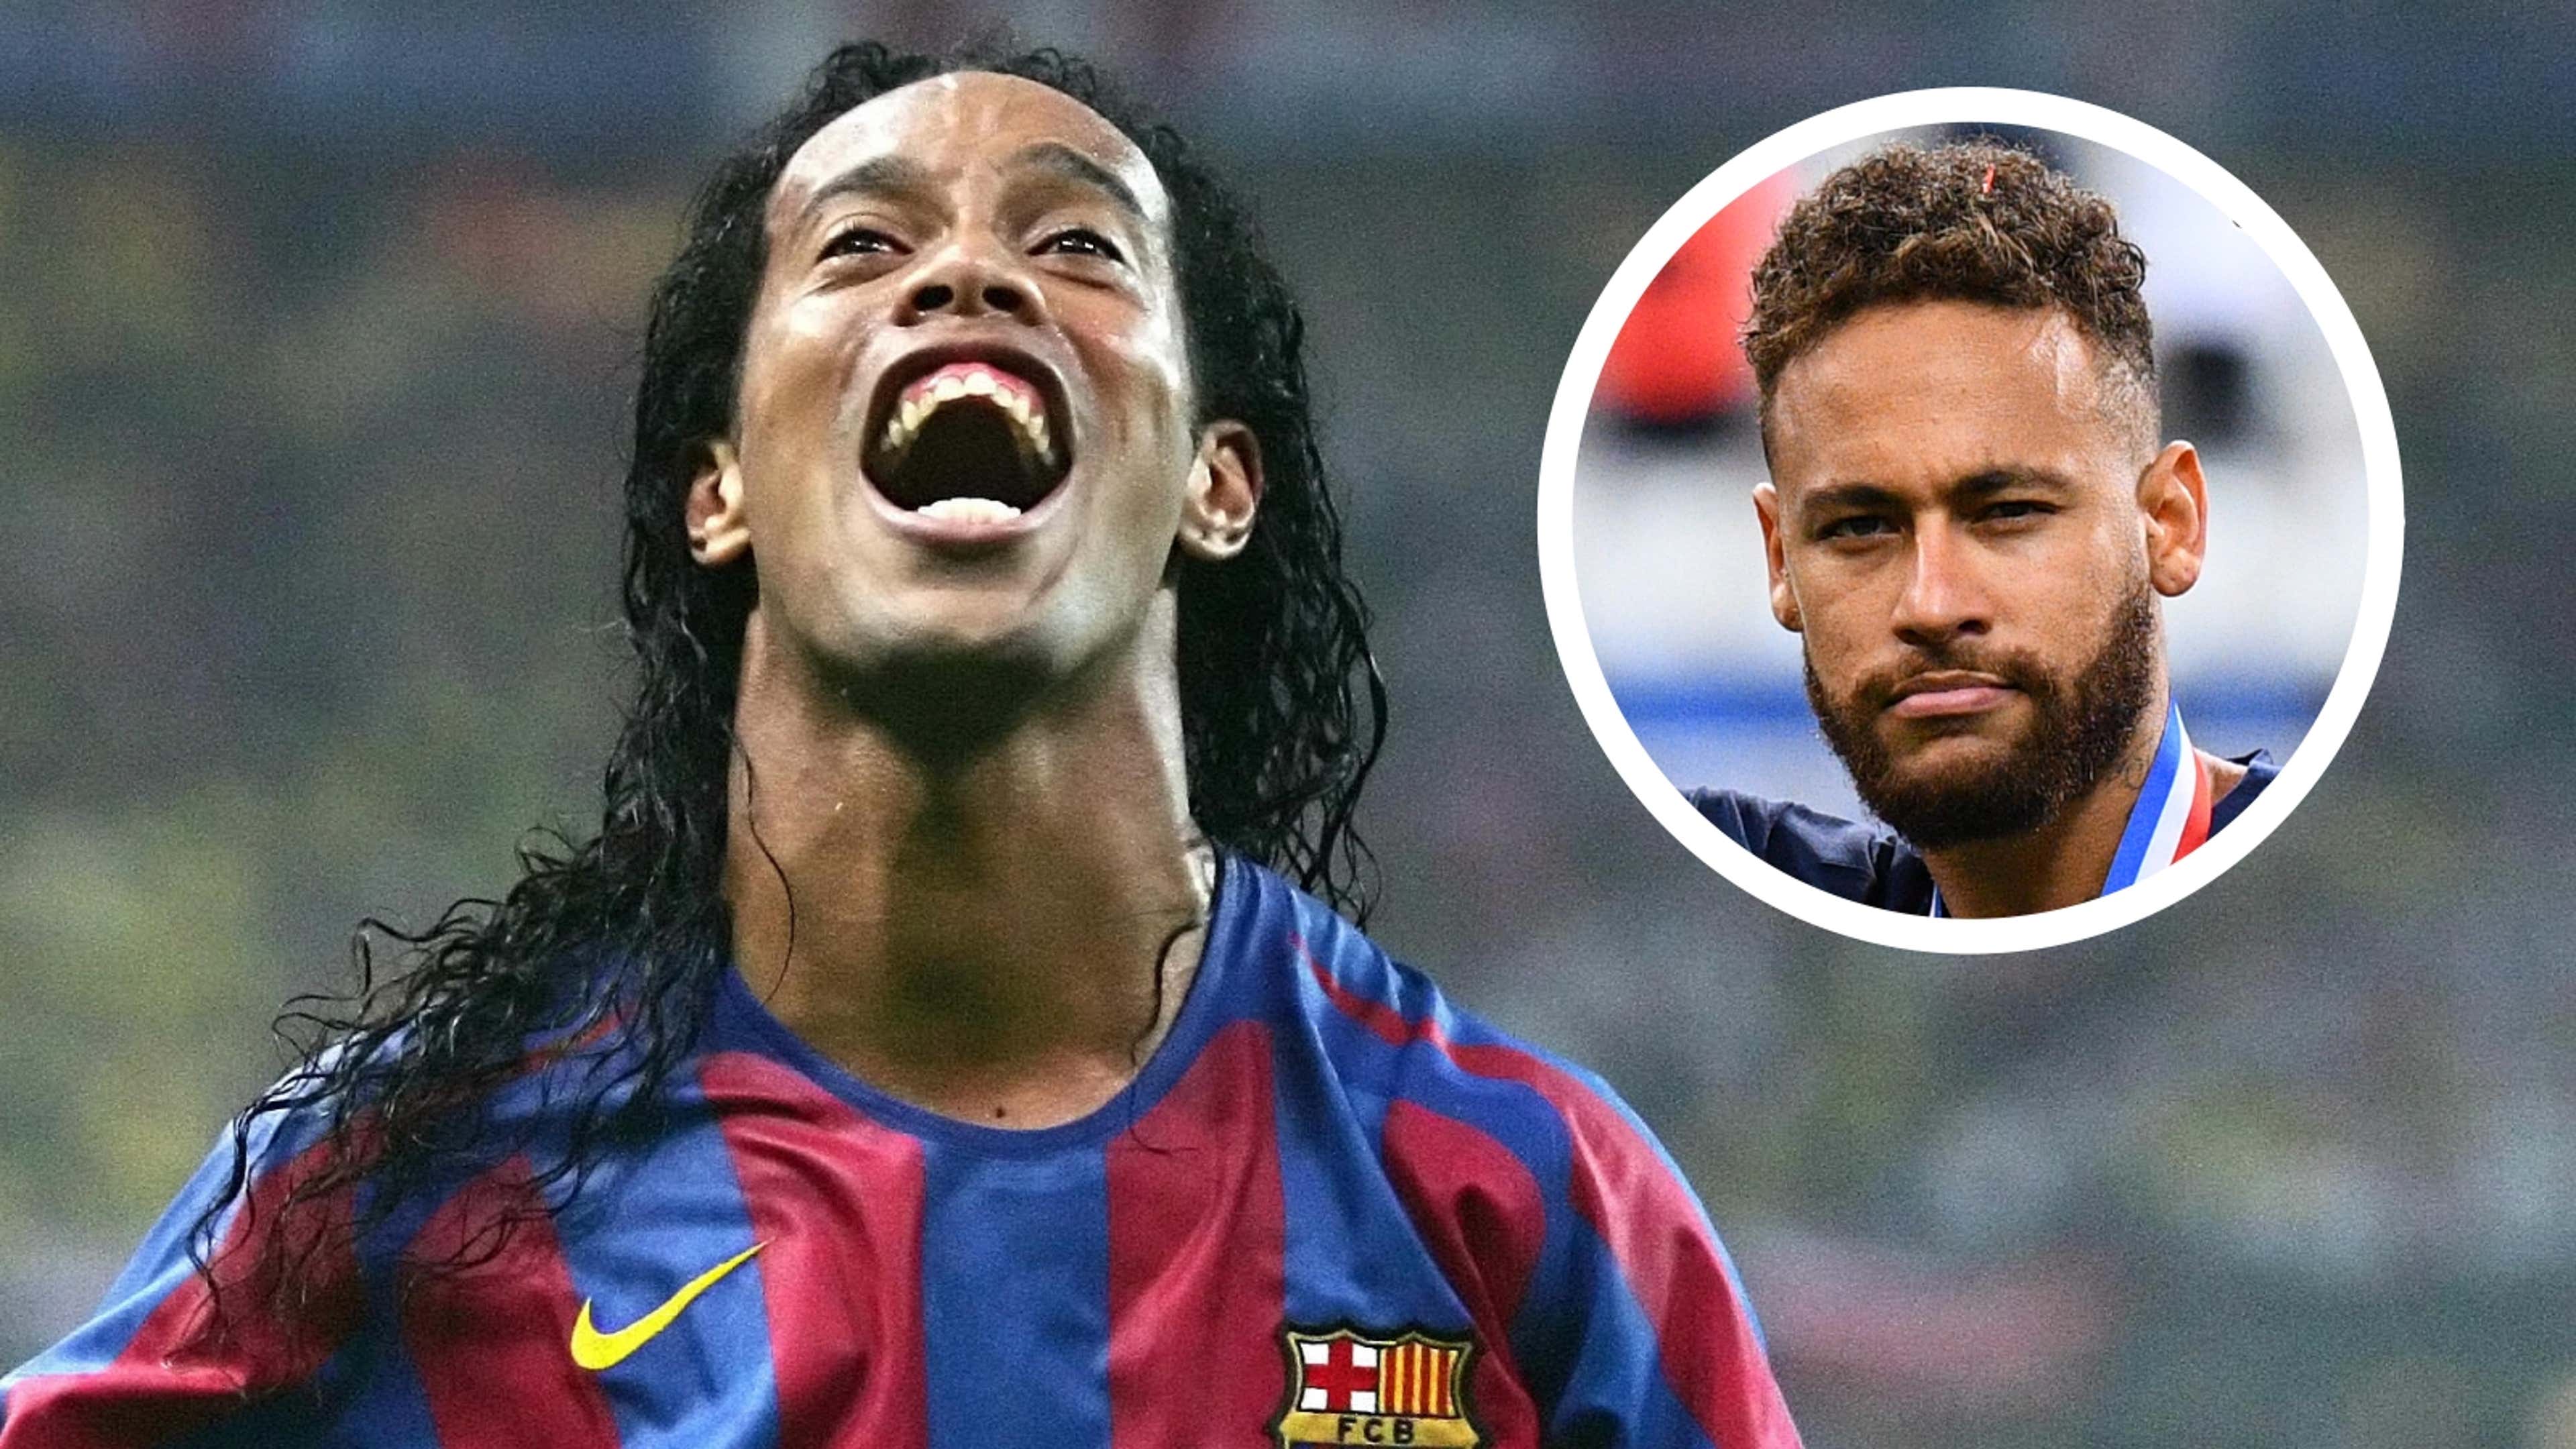 Ronaldinho, the one who more trusts the Balloon of Gold of Neymar